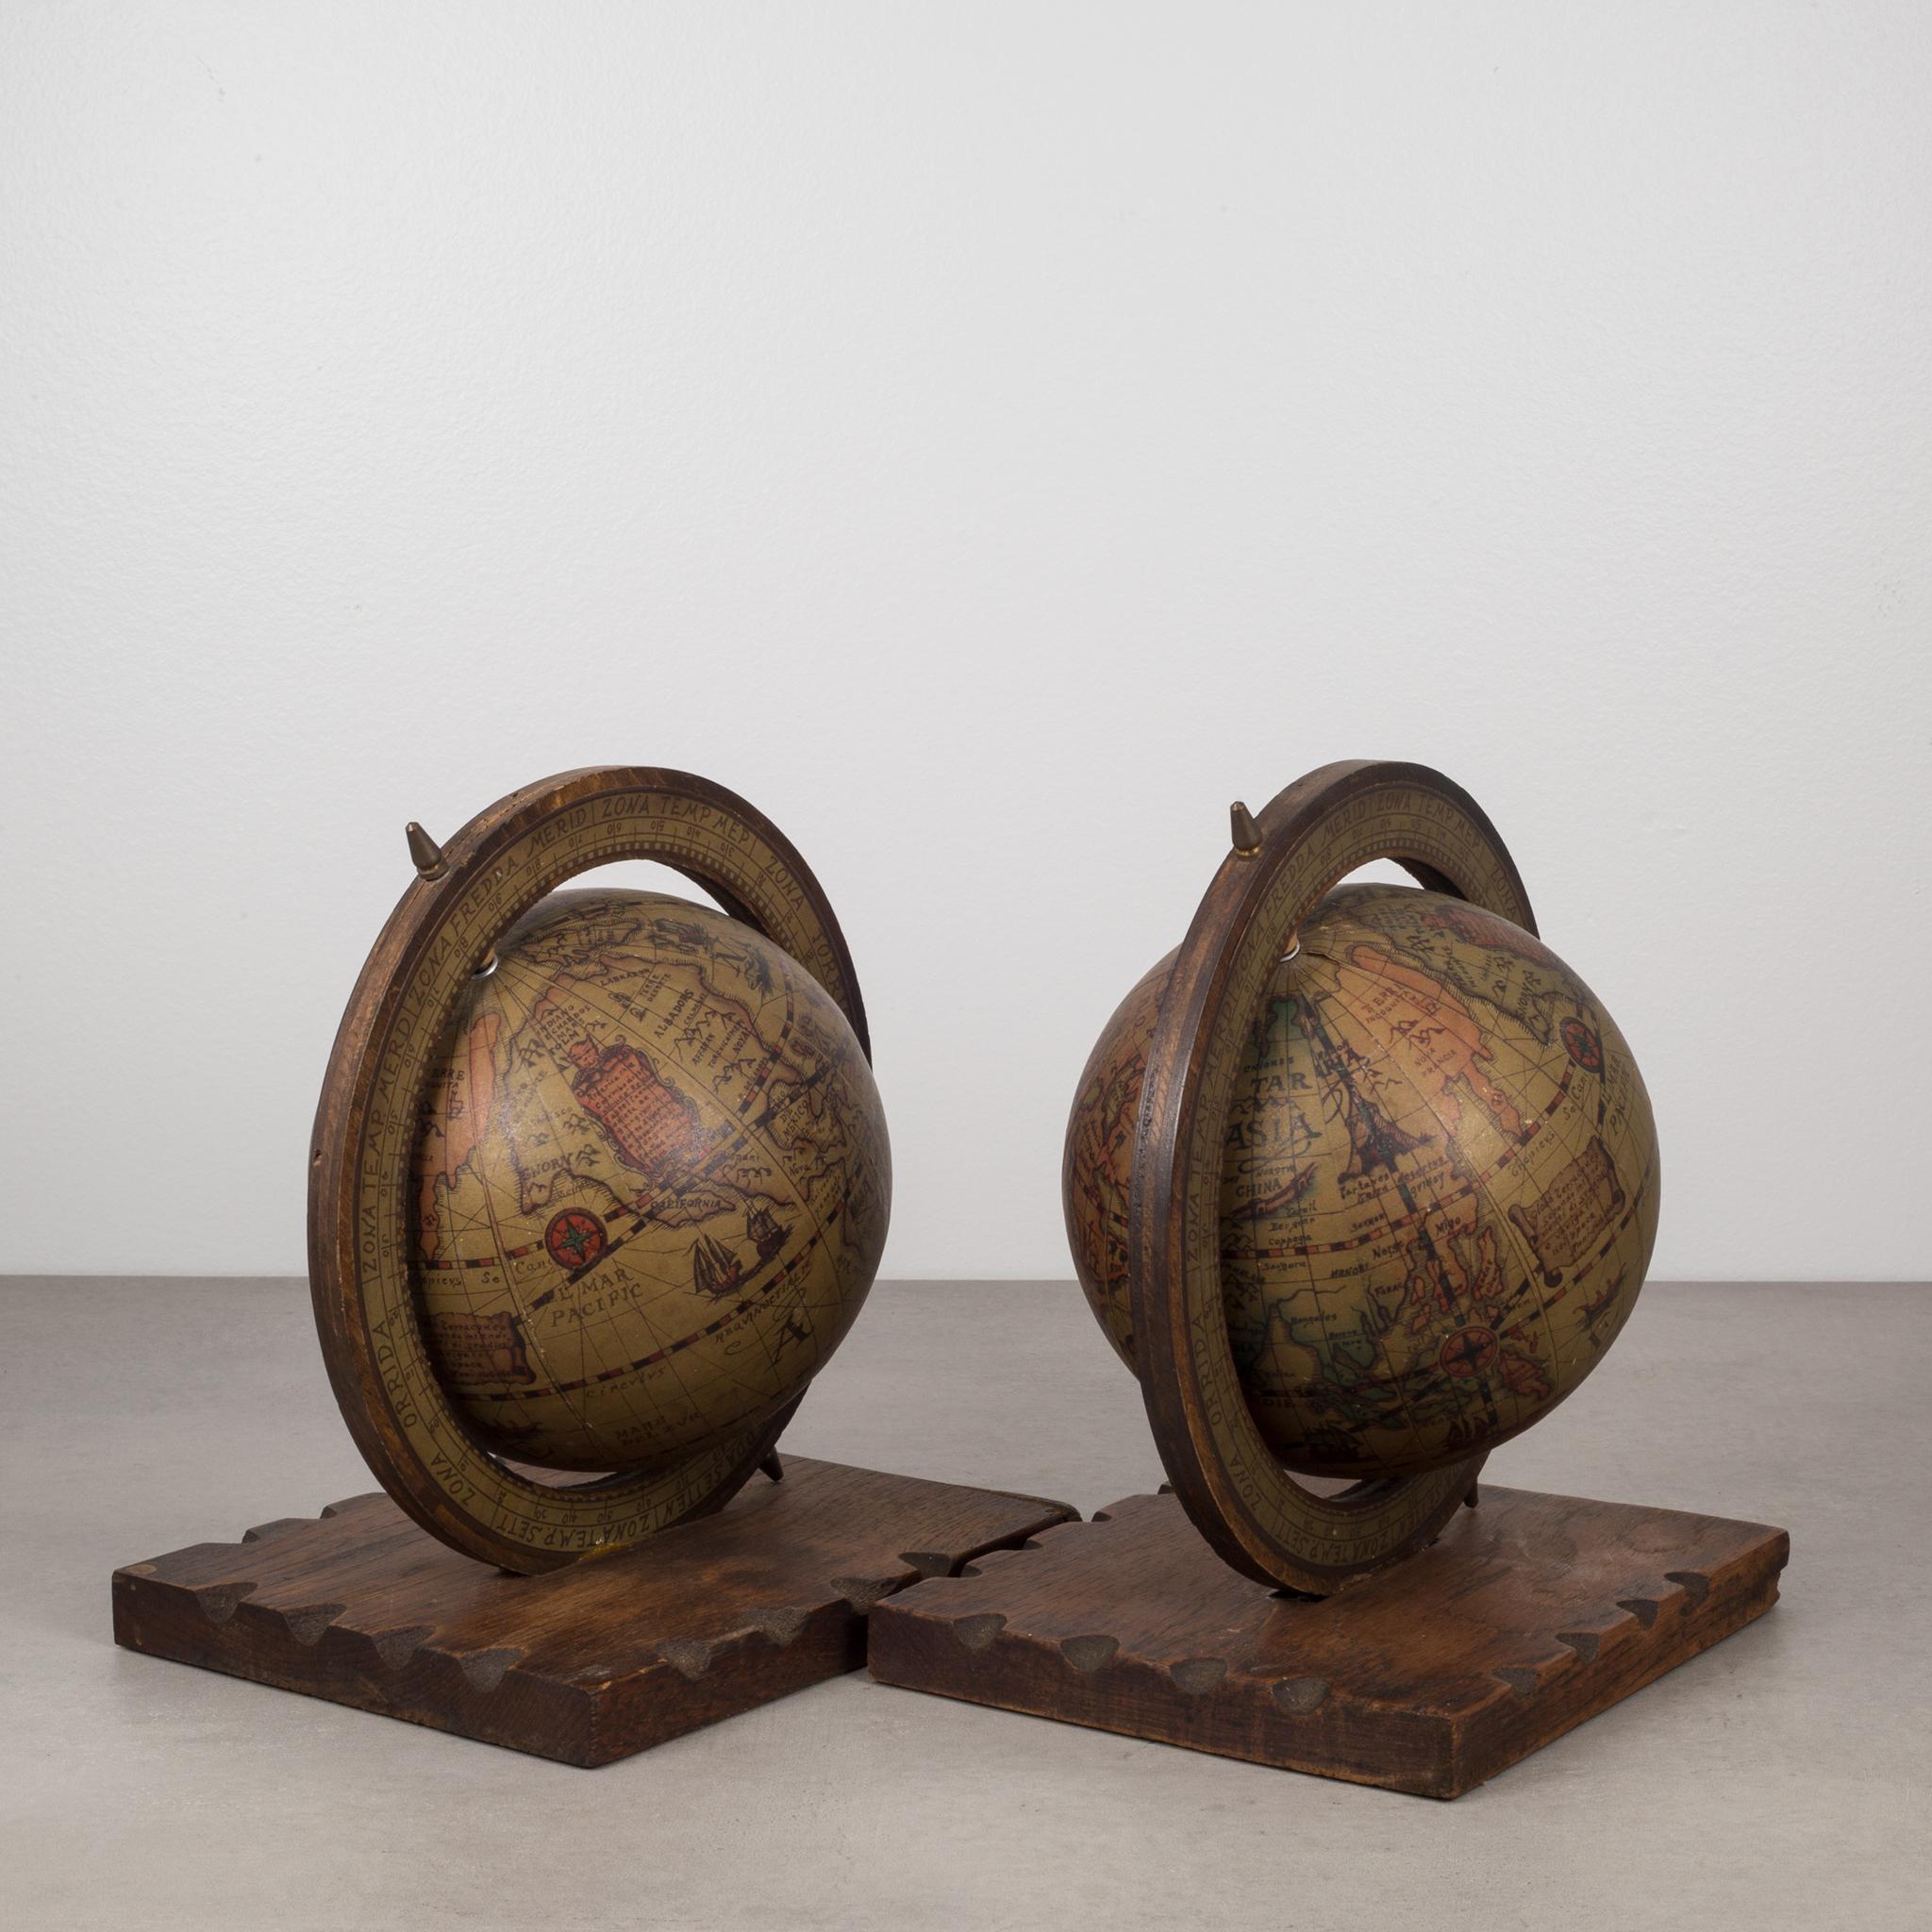 Metal Early to Mid-20th Century Rotating Globe Bookends, circa 1940s-1950s